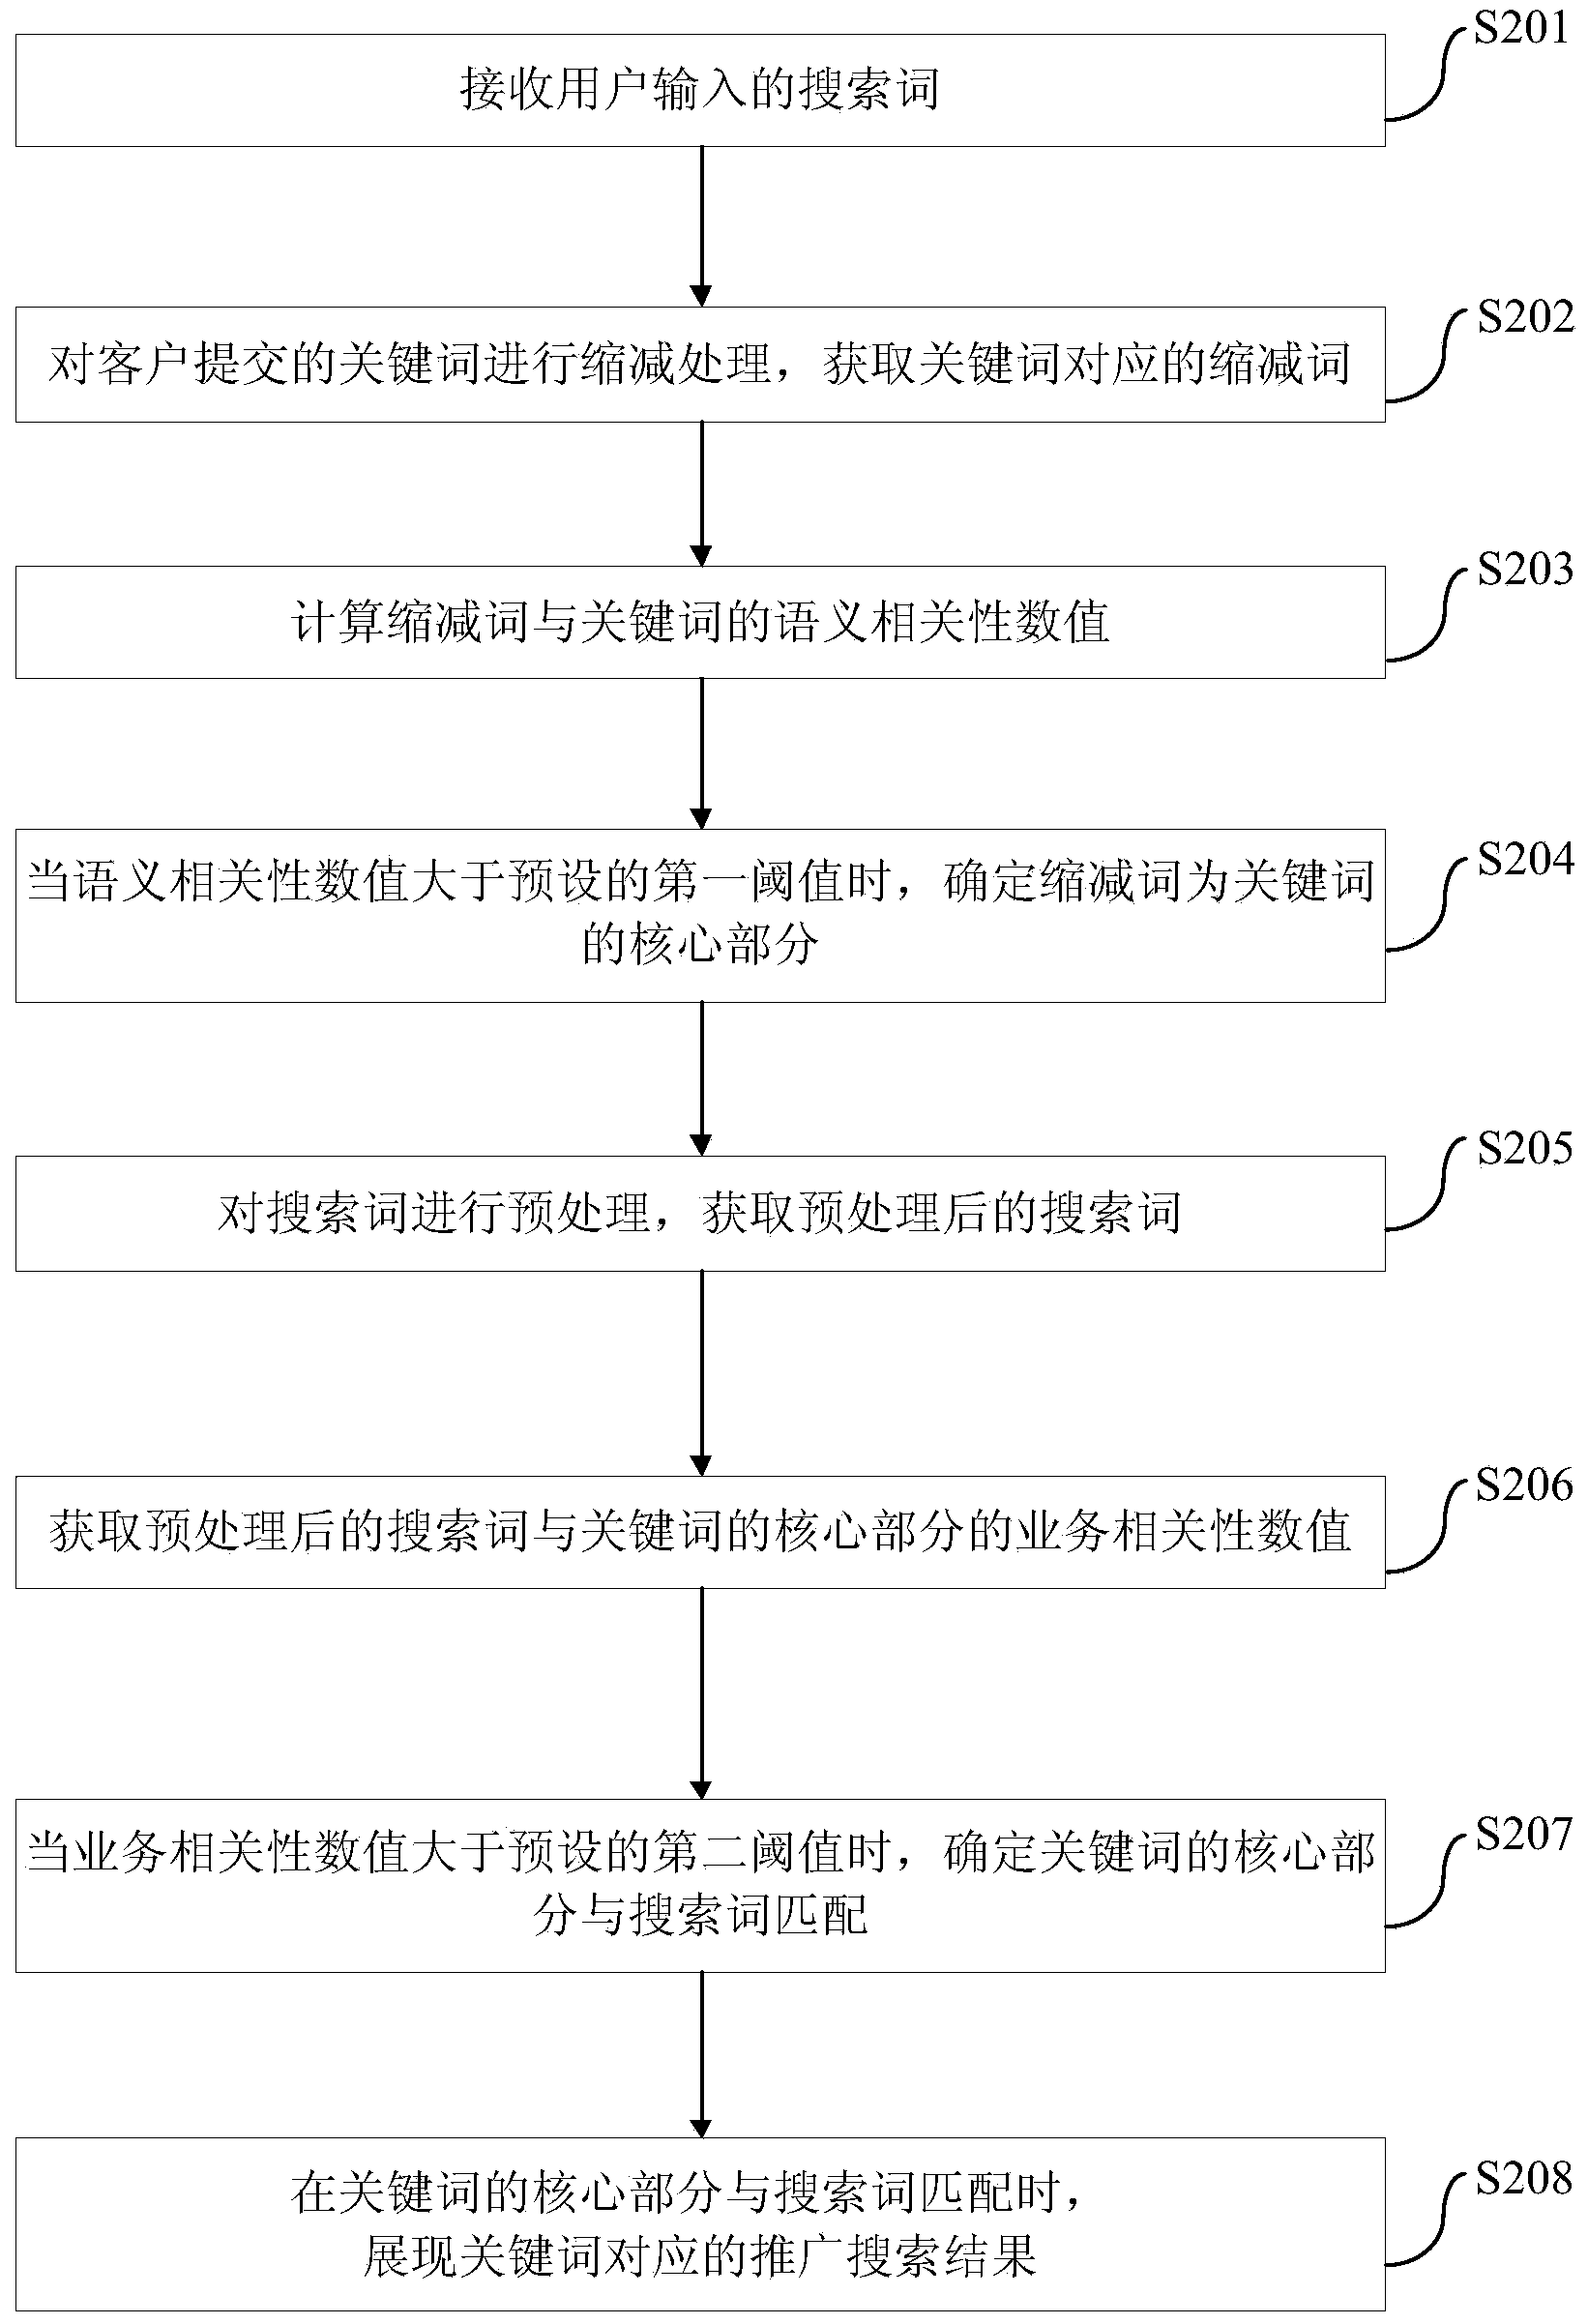 Promotion search result display method and device